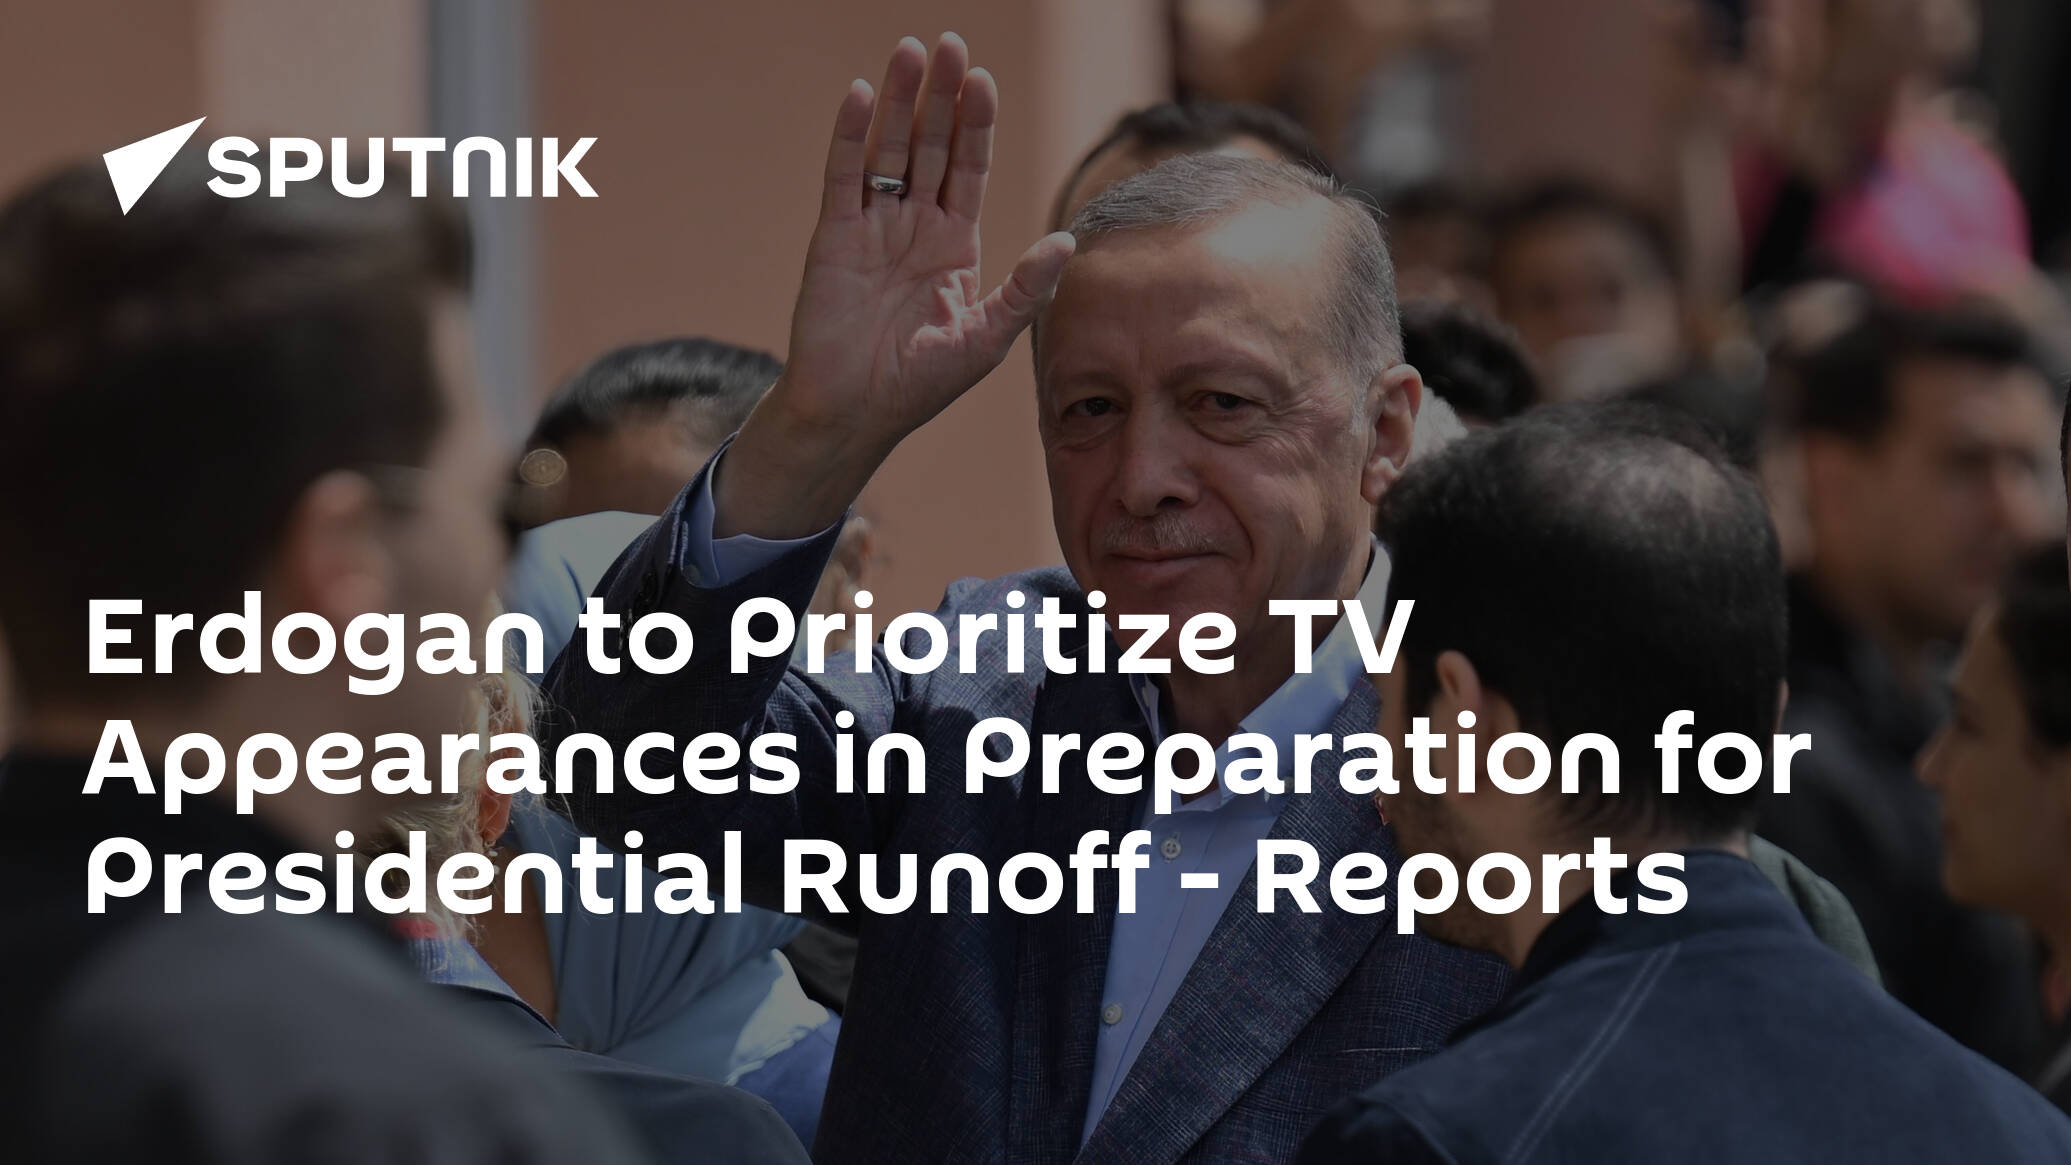 Erdogan to Prioritize TV Appearances in Preparation for Presidential Runoff – Reports